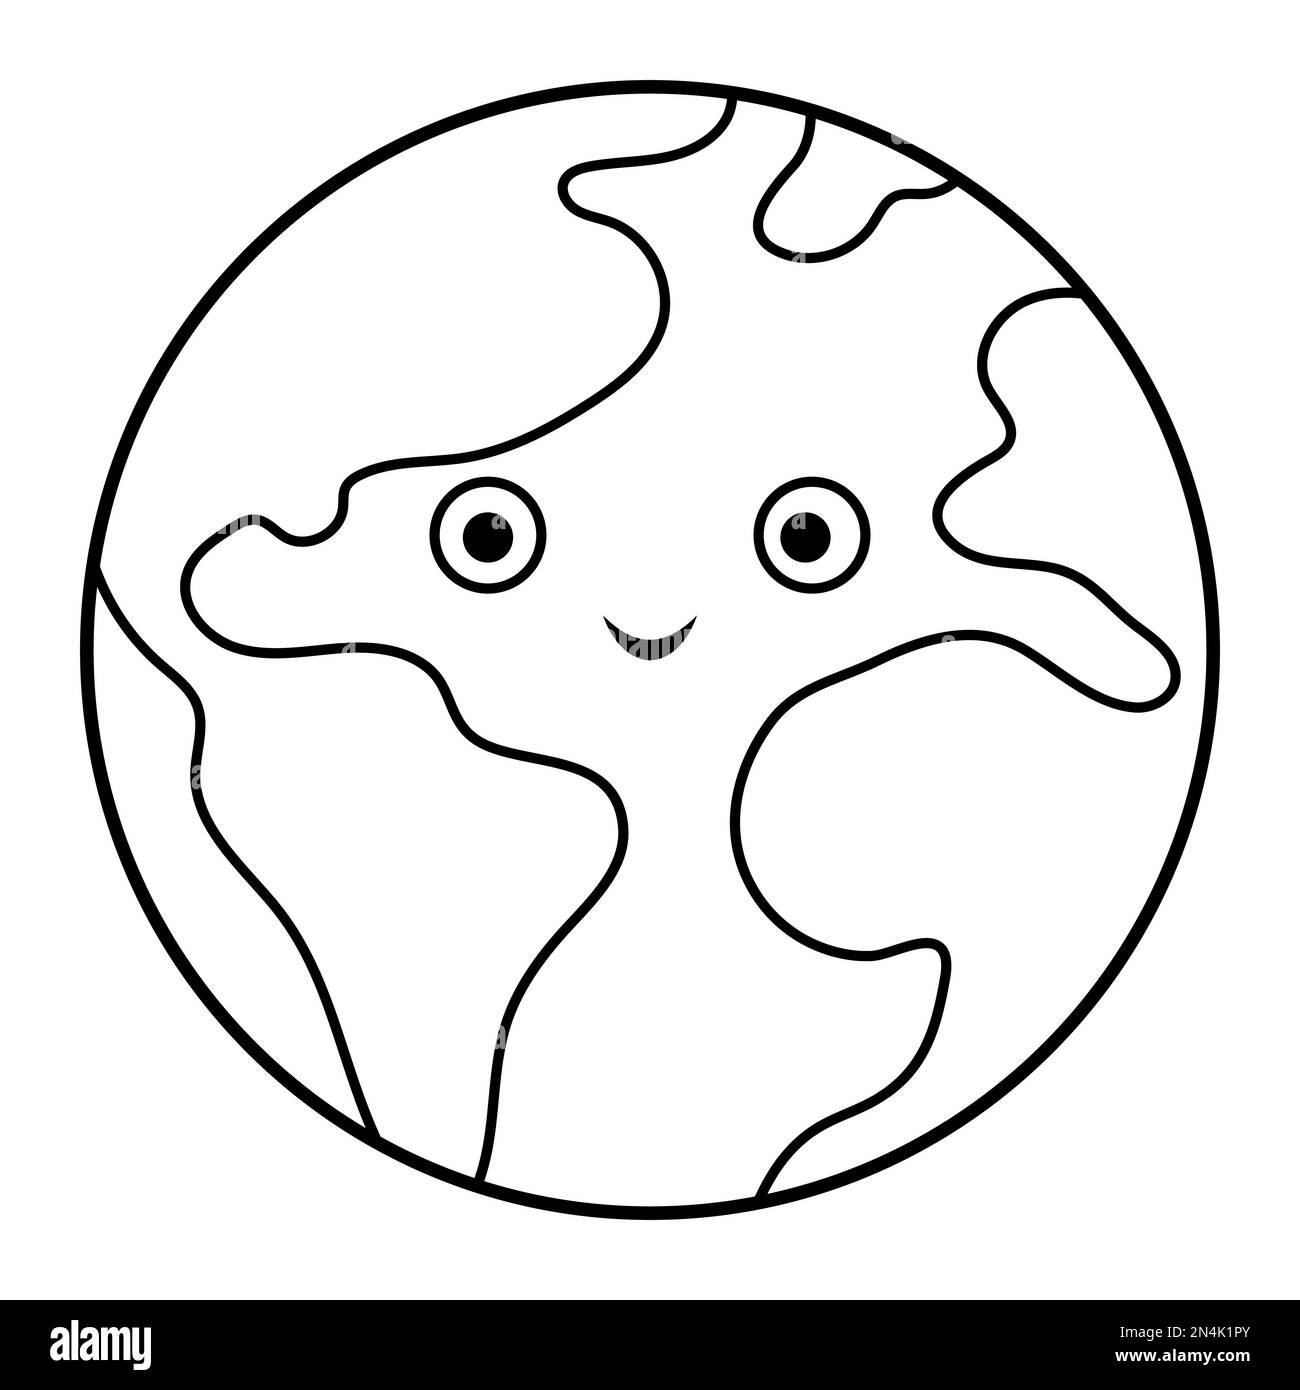 Vector black and white earth illustration for children. Outline smiling planet icon isolated on white background. Space coloring page for kids Stock Vector